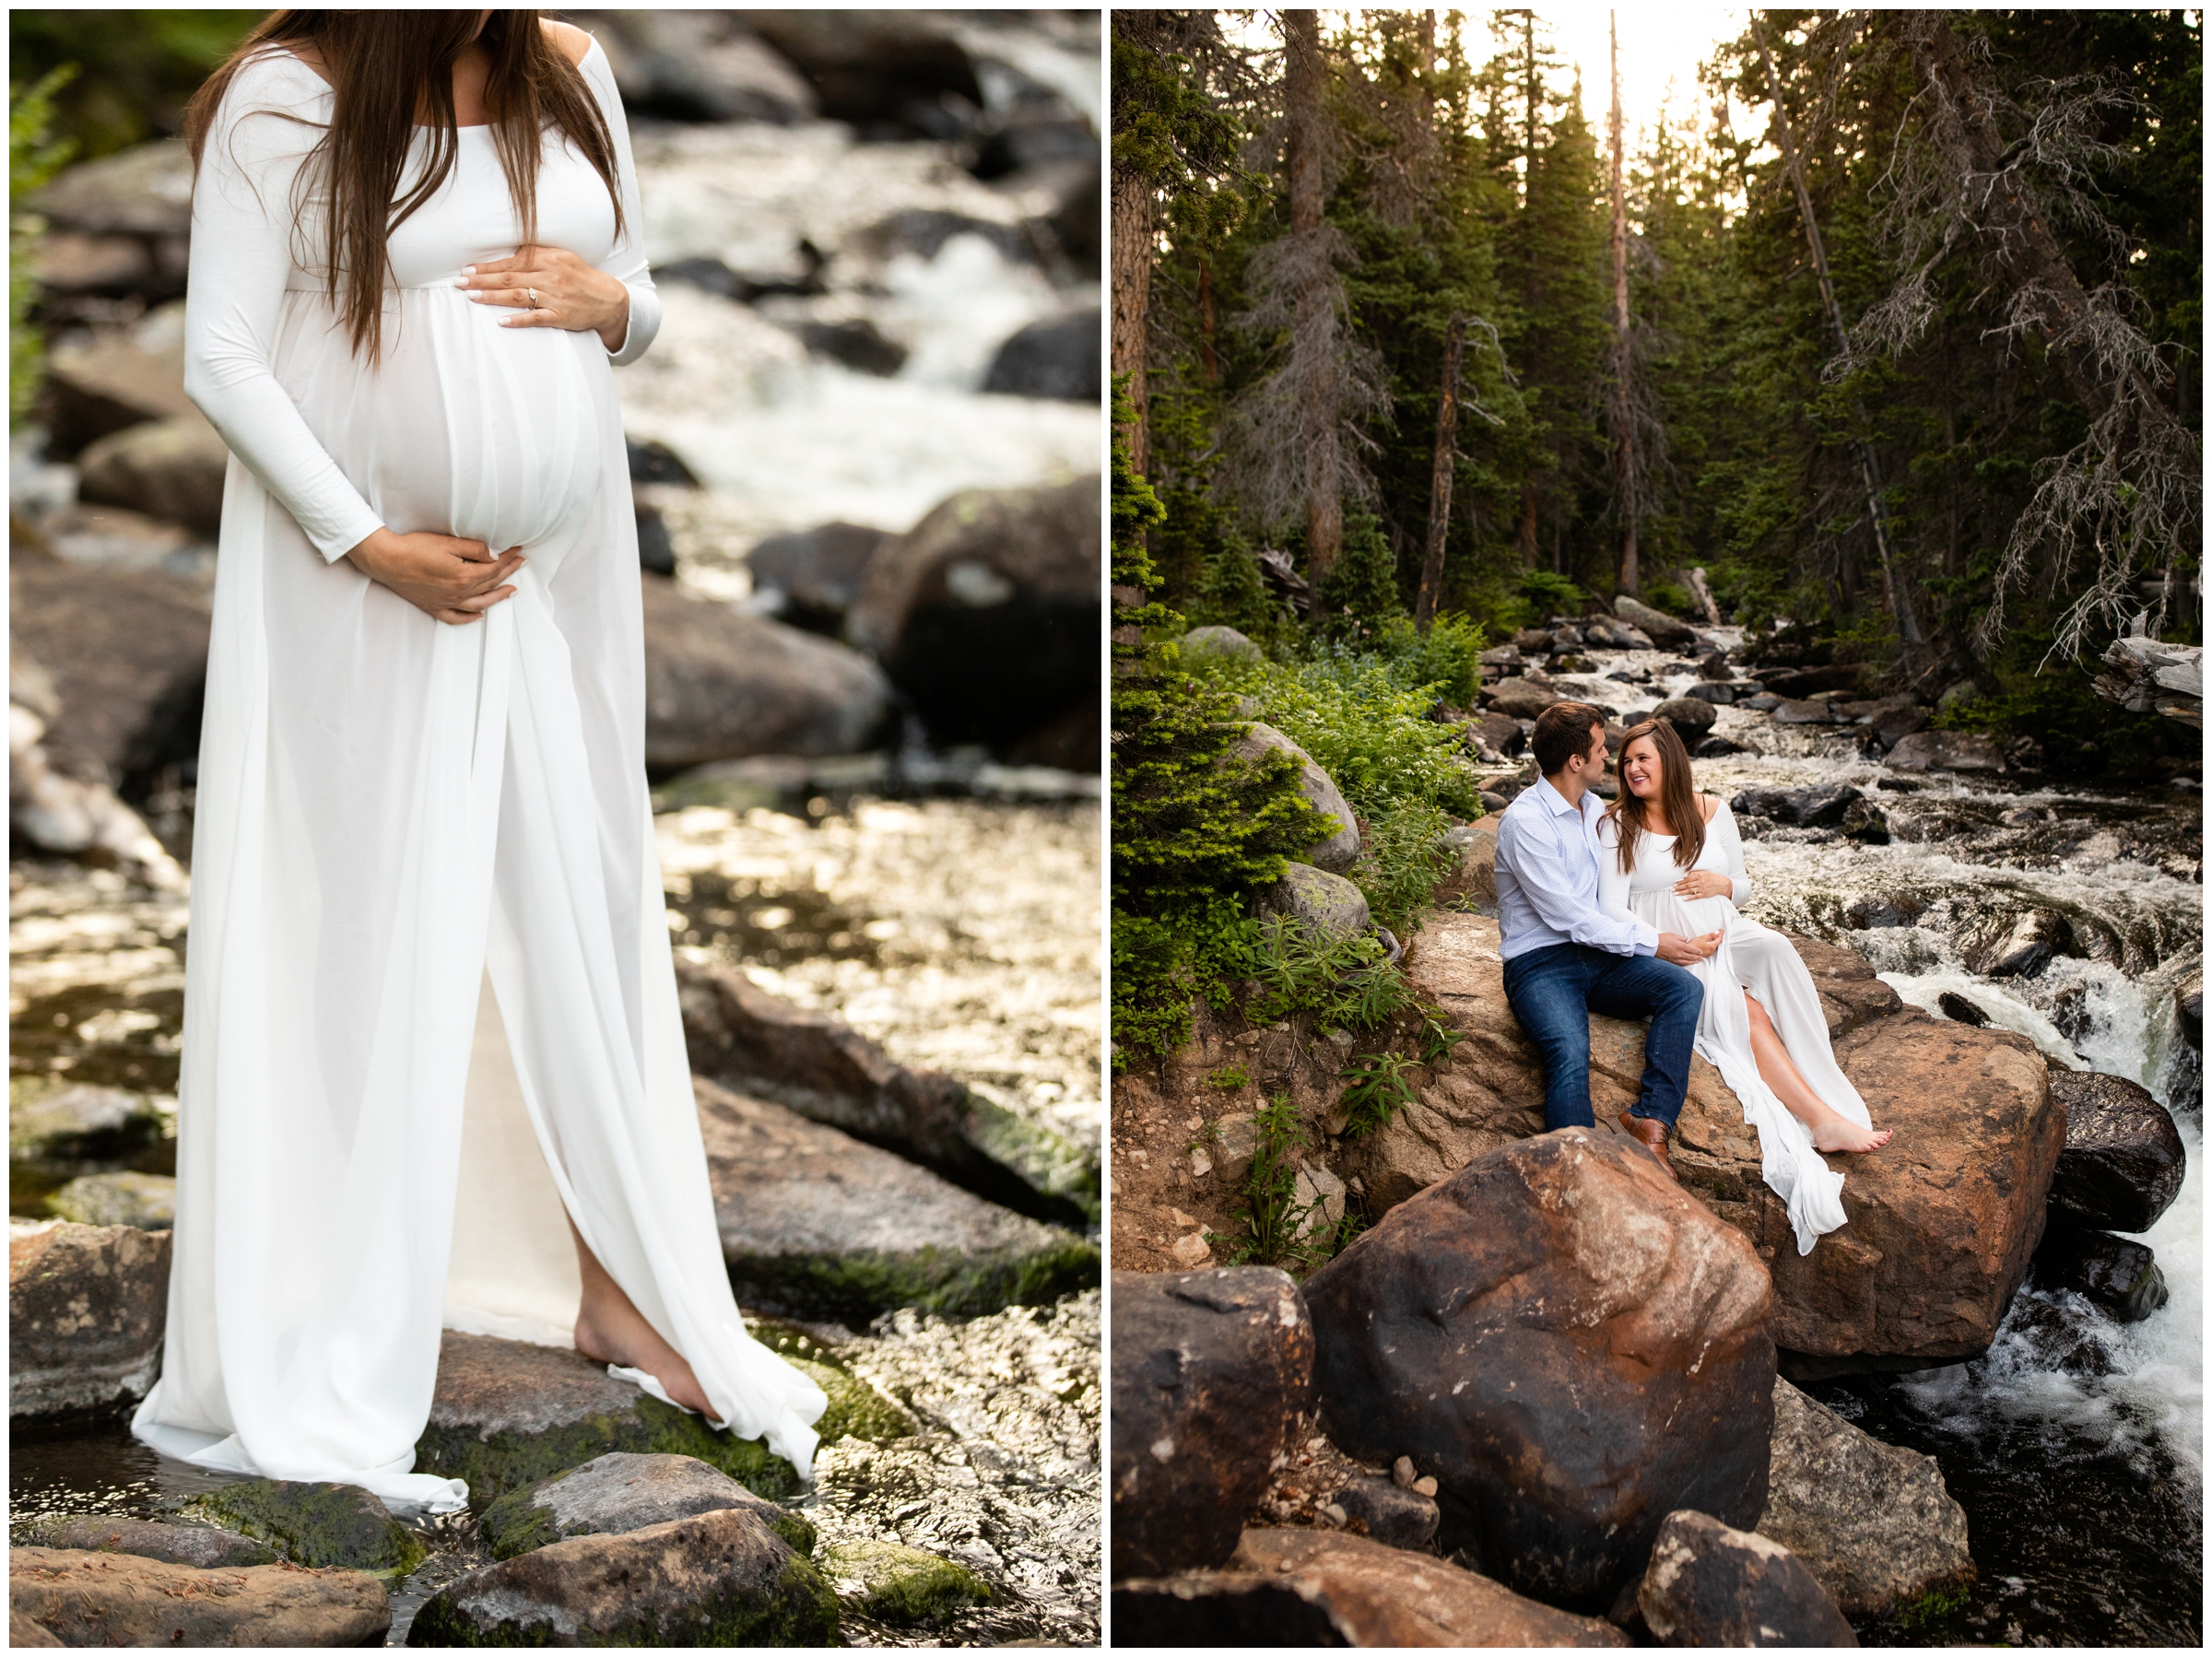 River maternity pictures at Brainard lake in the Colorado mountains 